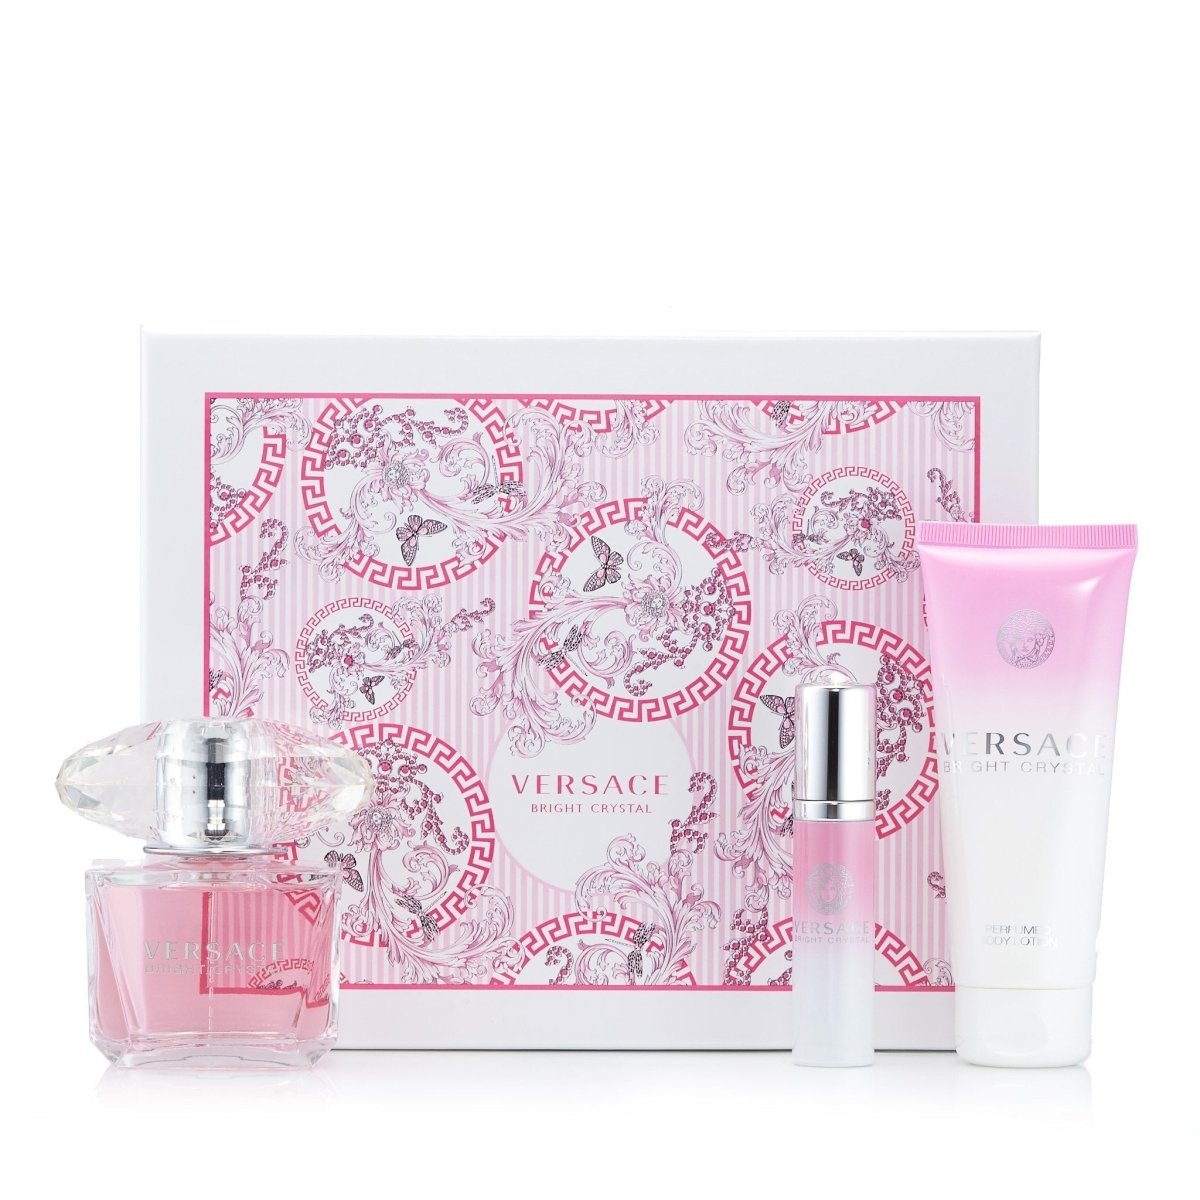 Bright Crystal Set for Women by Versace 3.0 oz.